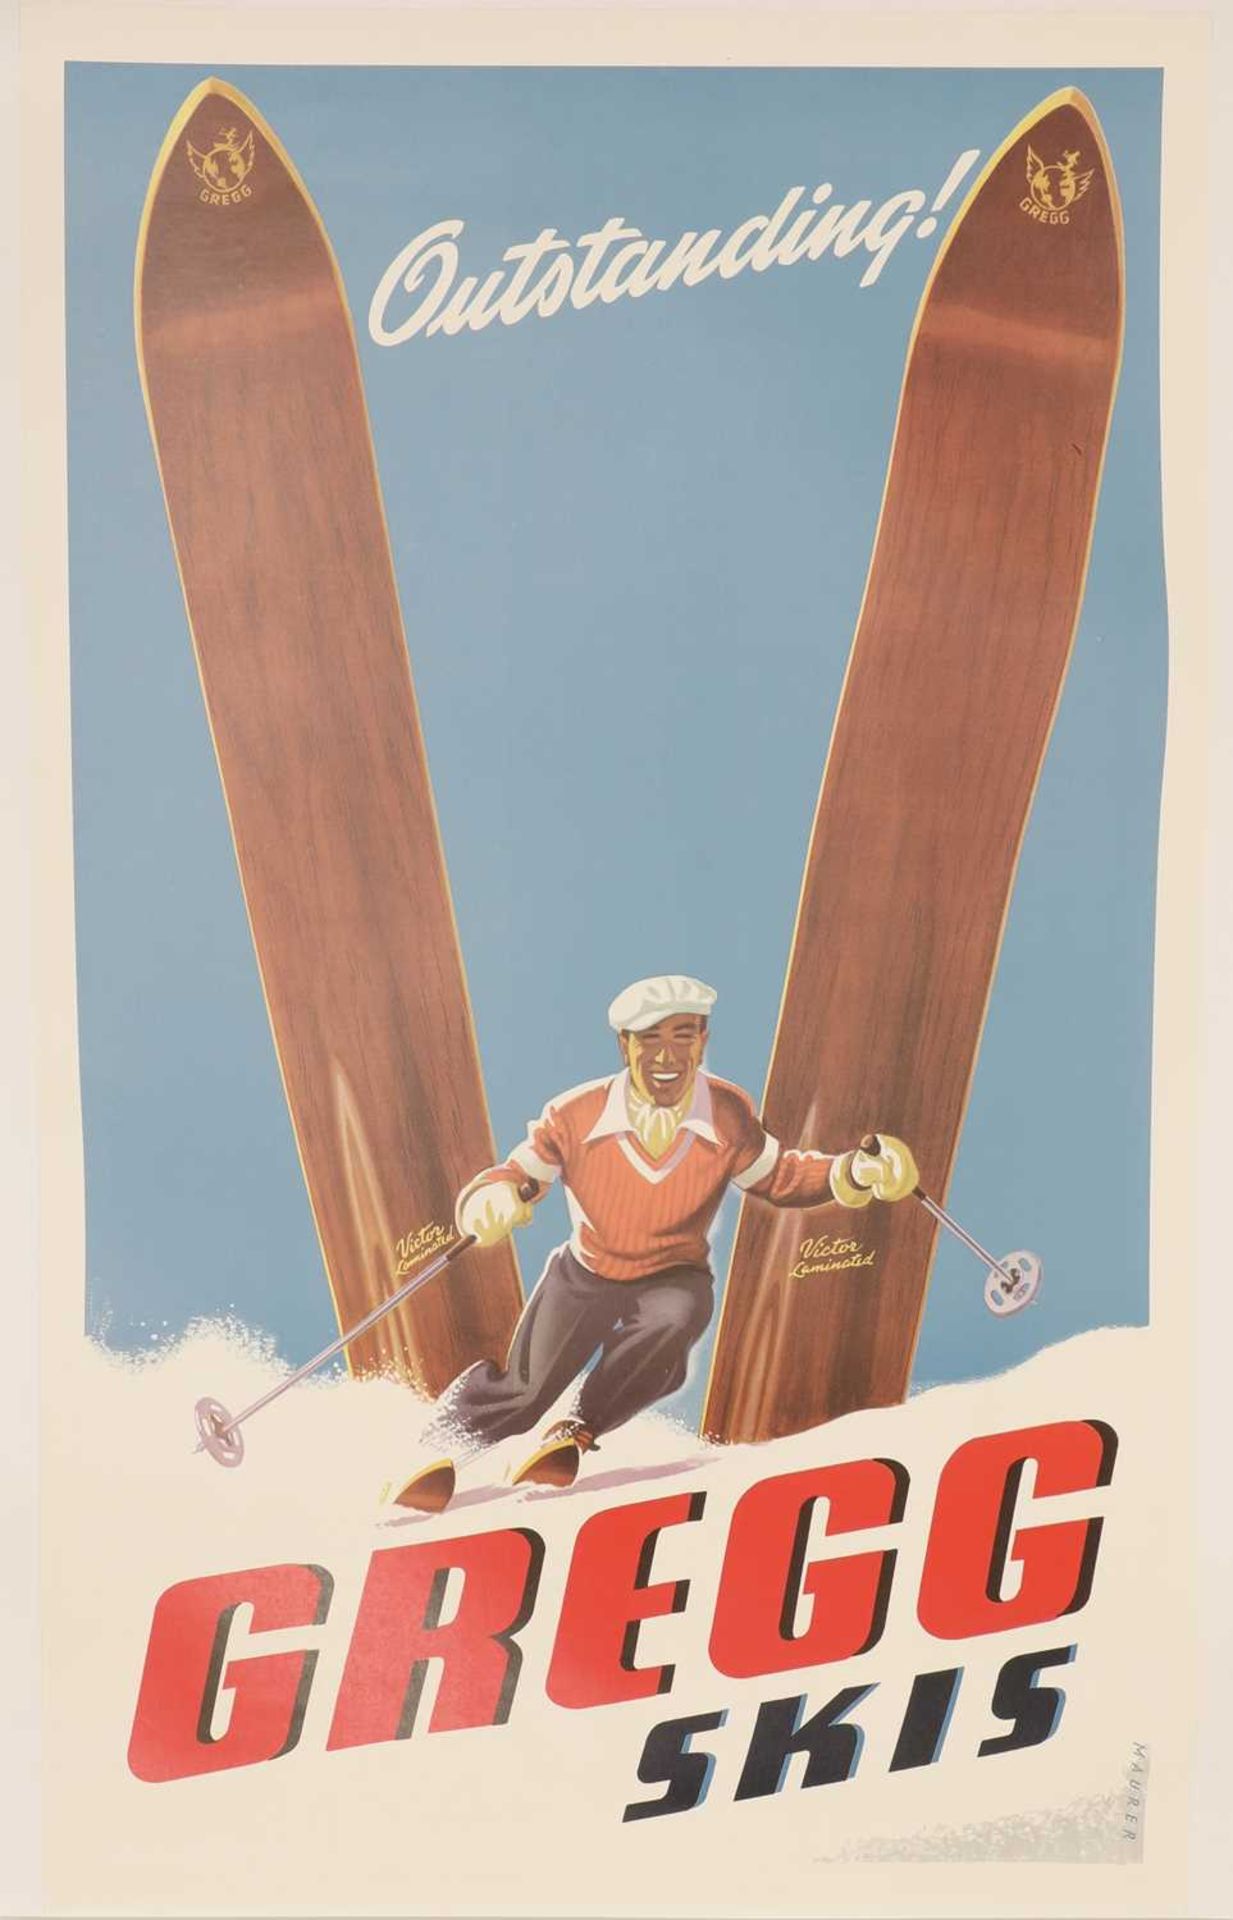 An American advertising poster,